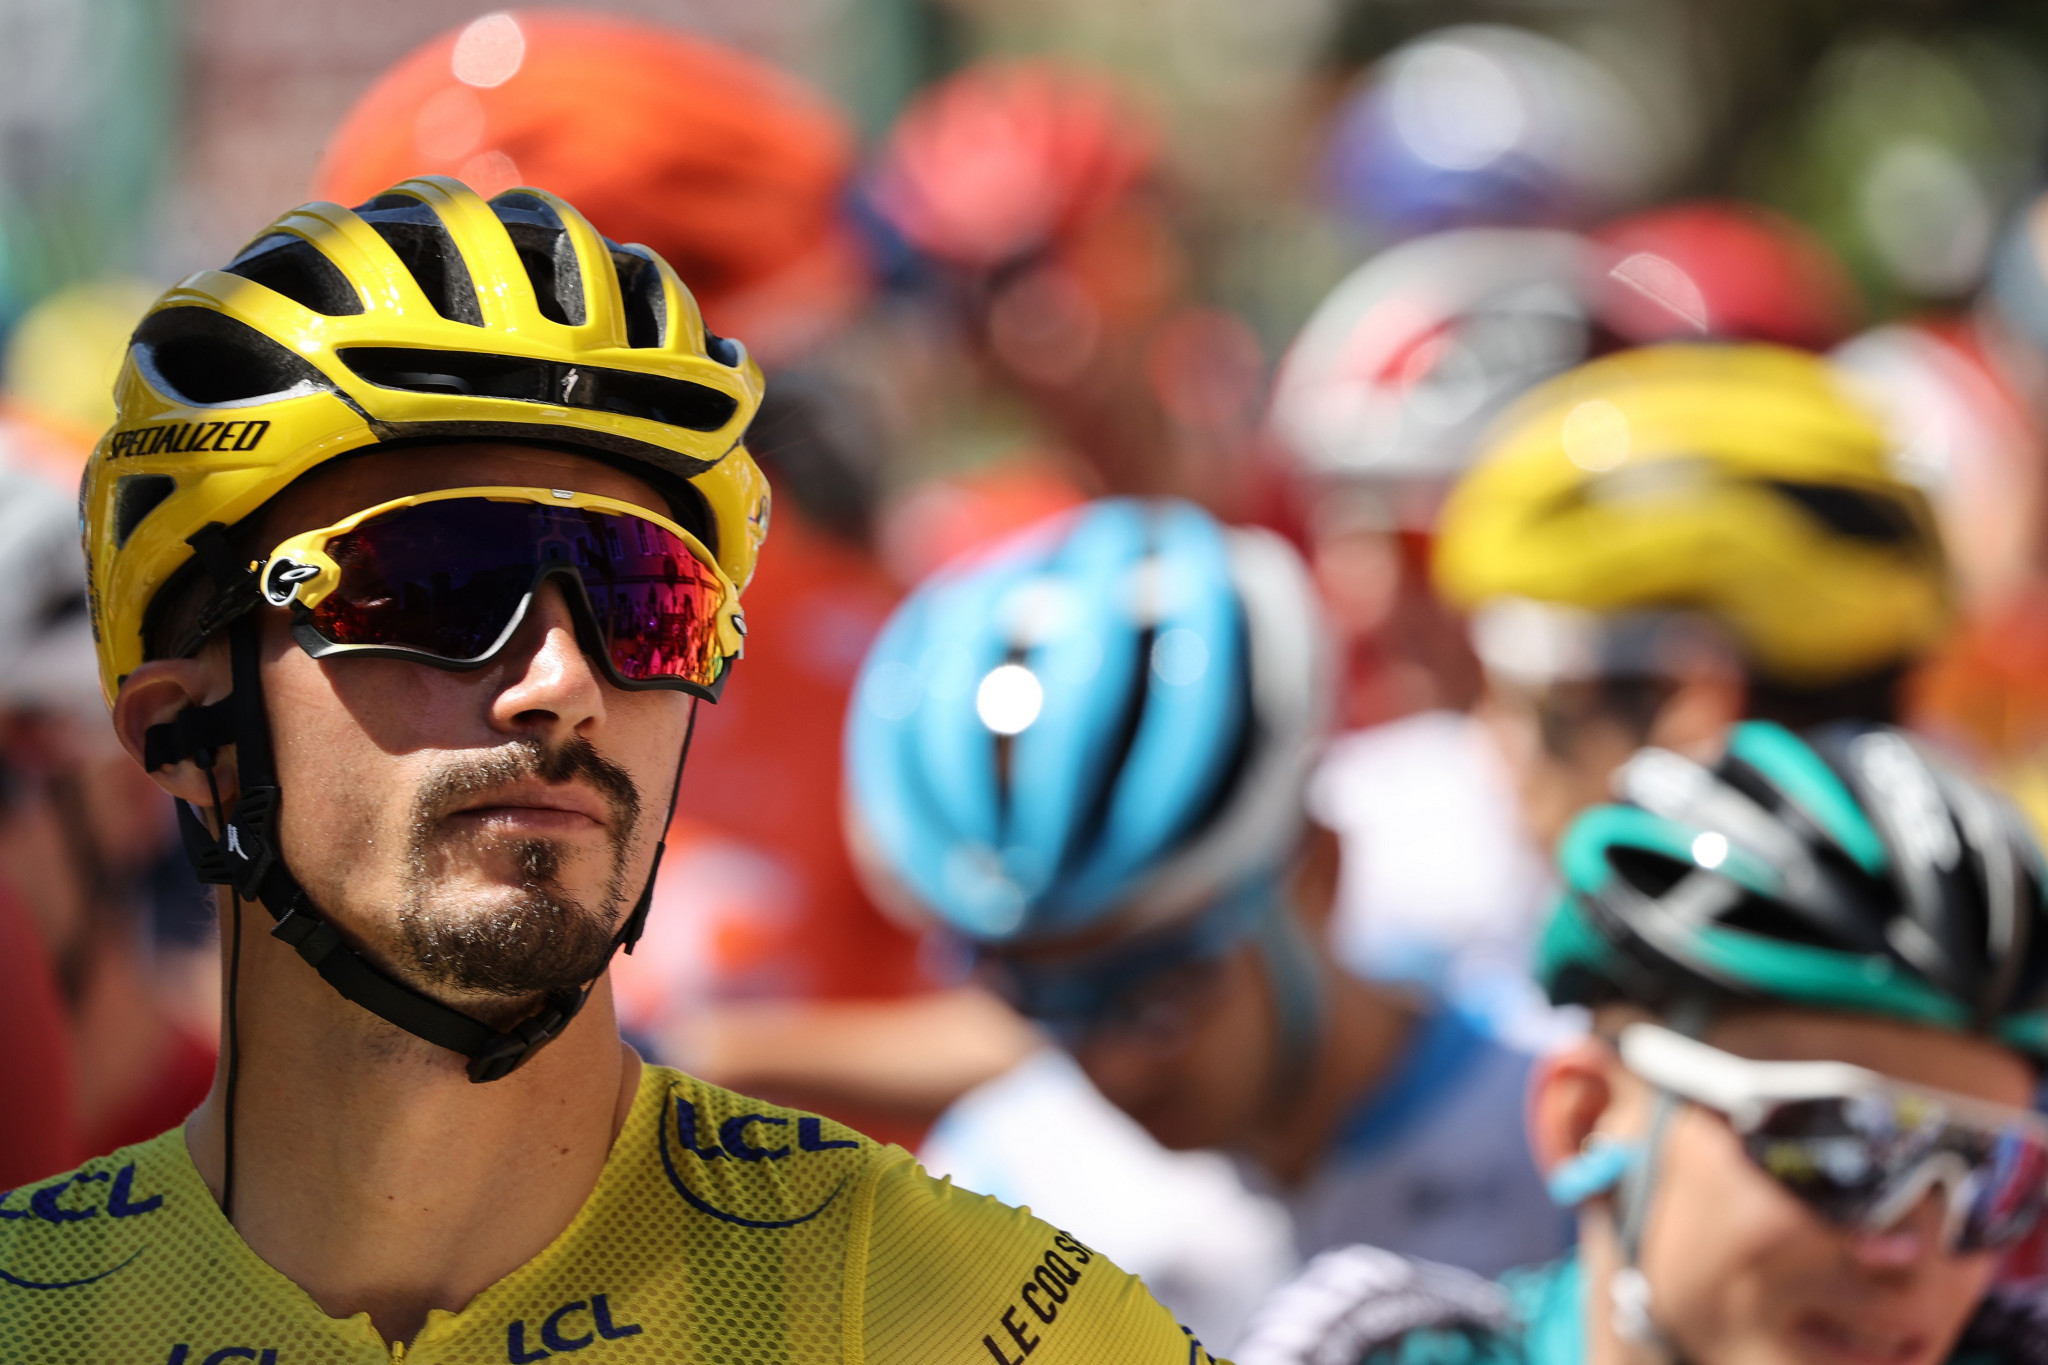 Julian Alaphilippe dropped to 16th place in the overall standings after he was handed a 20 second penalty following the fifth stage of the Tour de France ©Getty Images